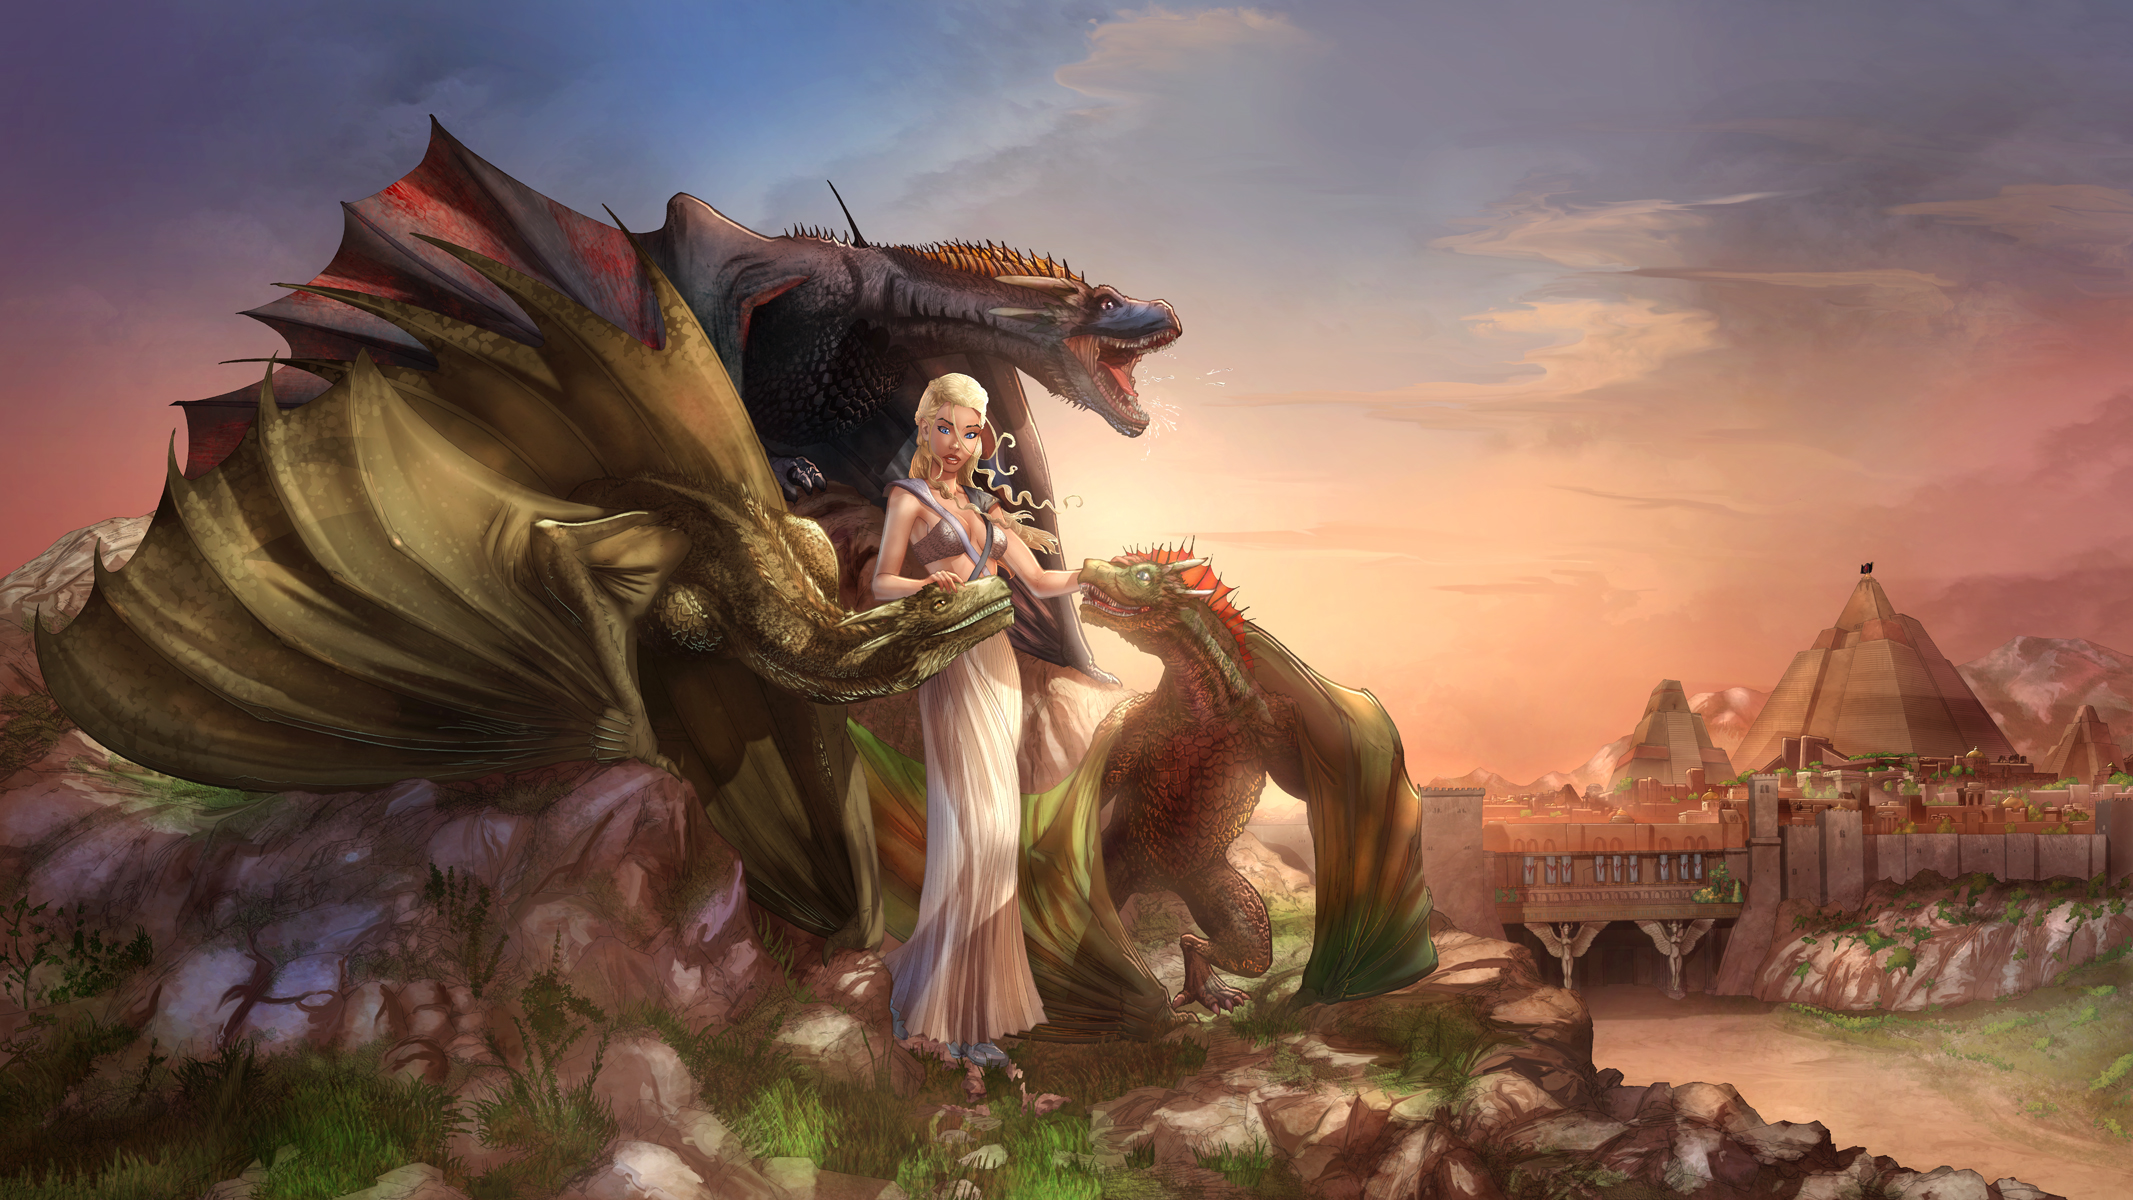 A Song Of Ice And Fire Daenerys Targaryen Dragon Fan Art Game Of Thrones Woman 2133x1200